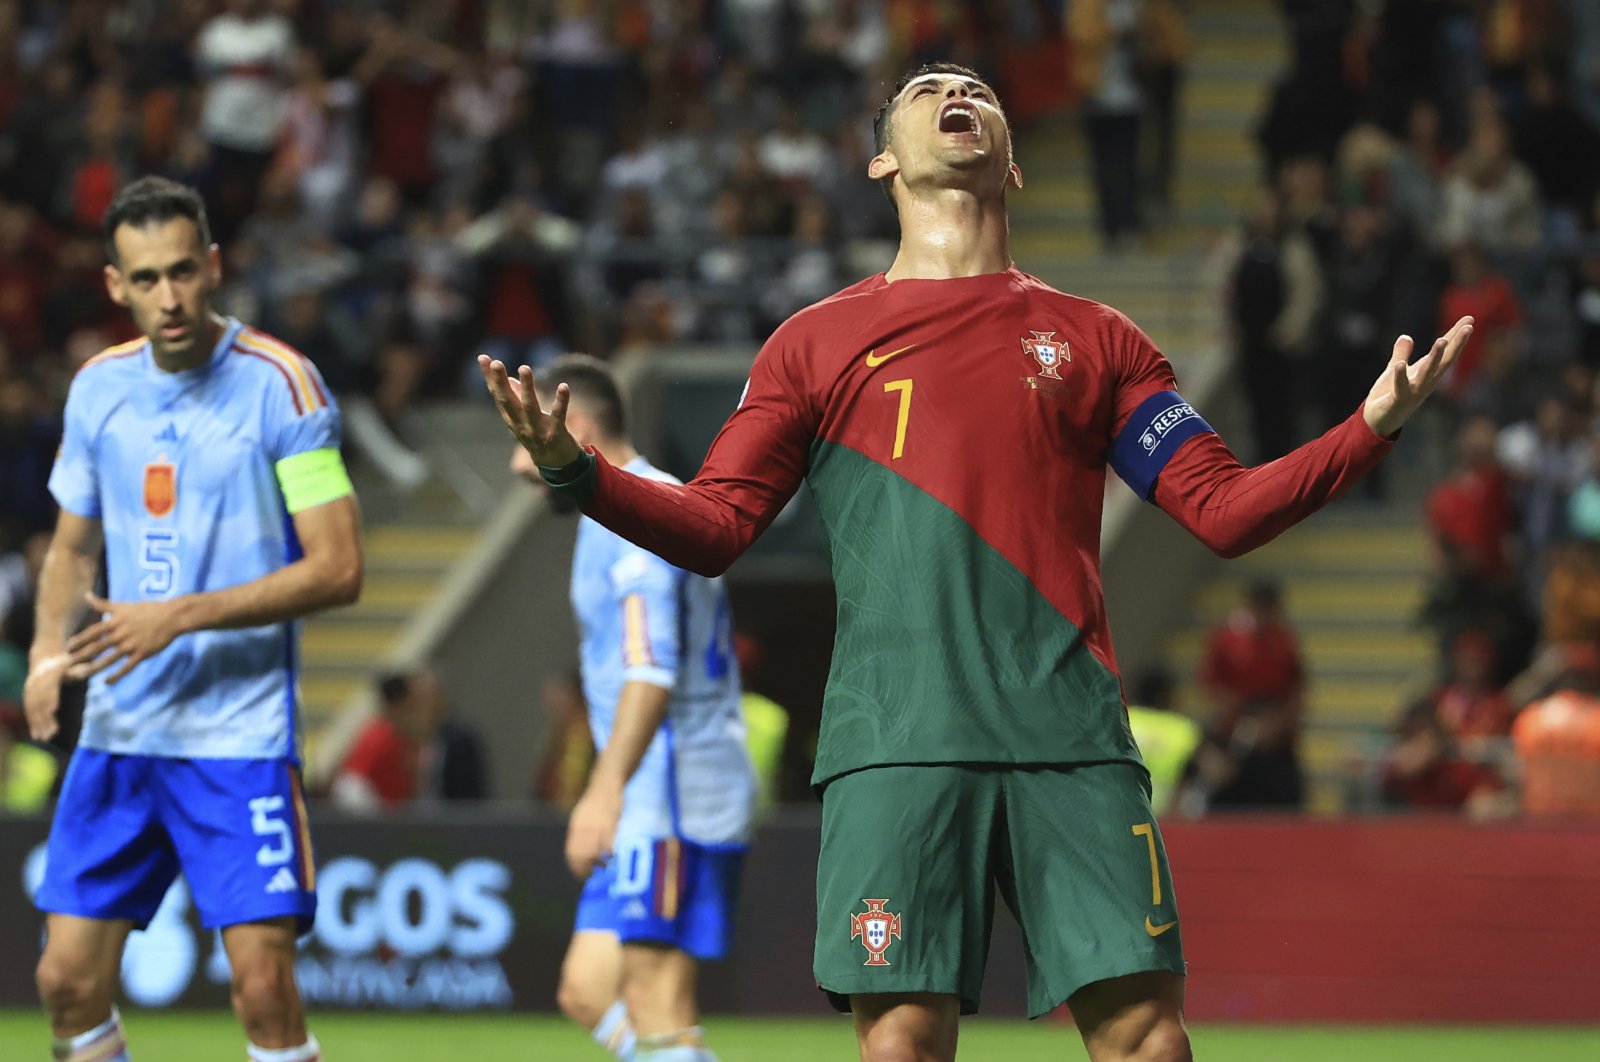 Portugal&#039;s Cristiano Ronaldo reacts after missing a scoring chance during the UEFA Nations League soccer match between Portugal and Spain at the Municipal Stadium, Braga, Portugal, Sept. 27, 2022. (AP Photo)